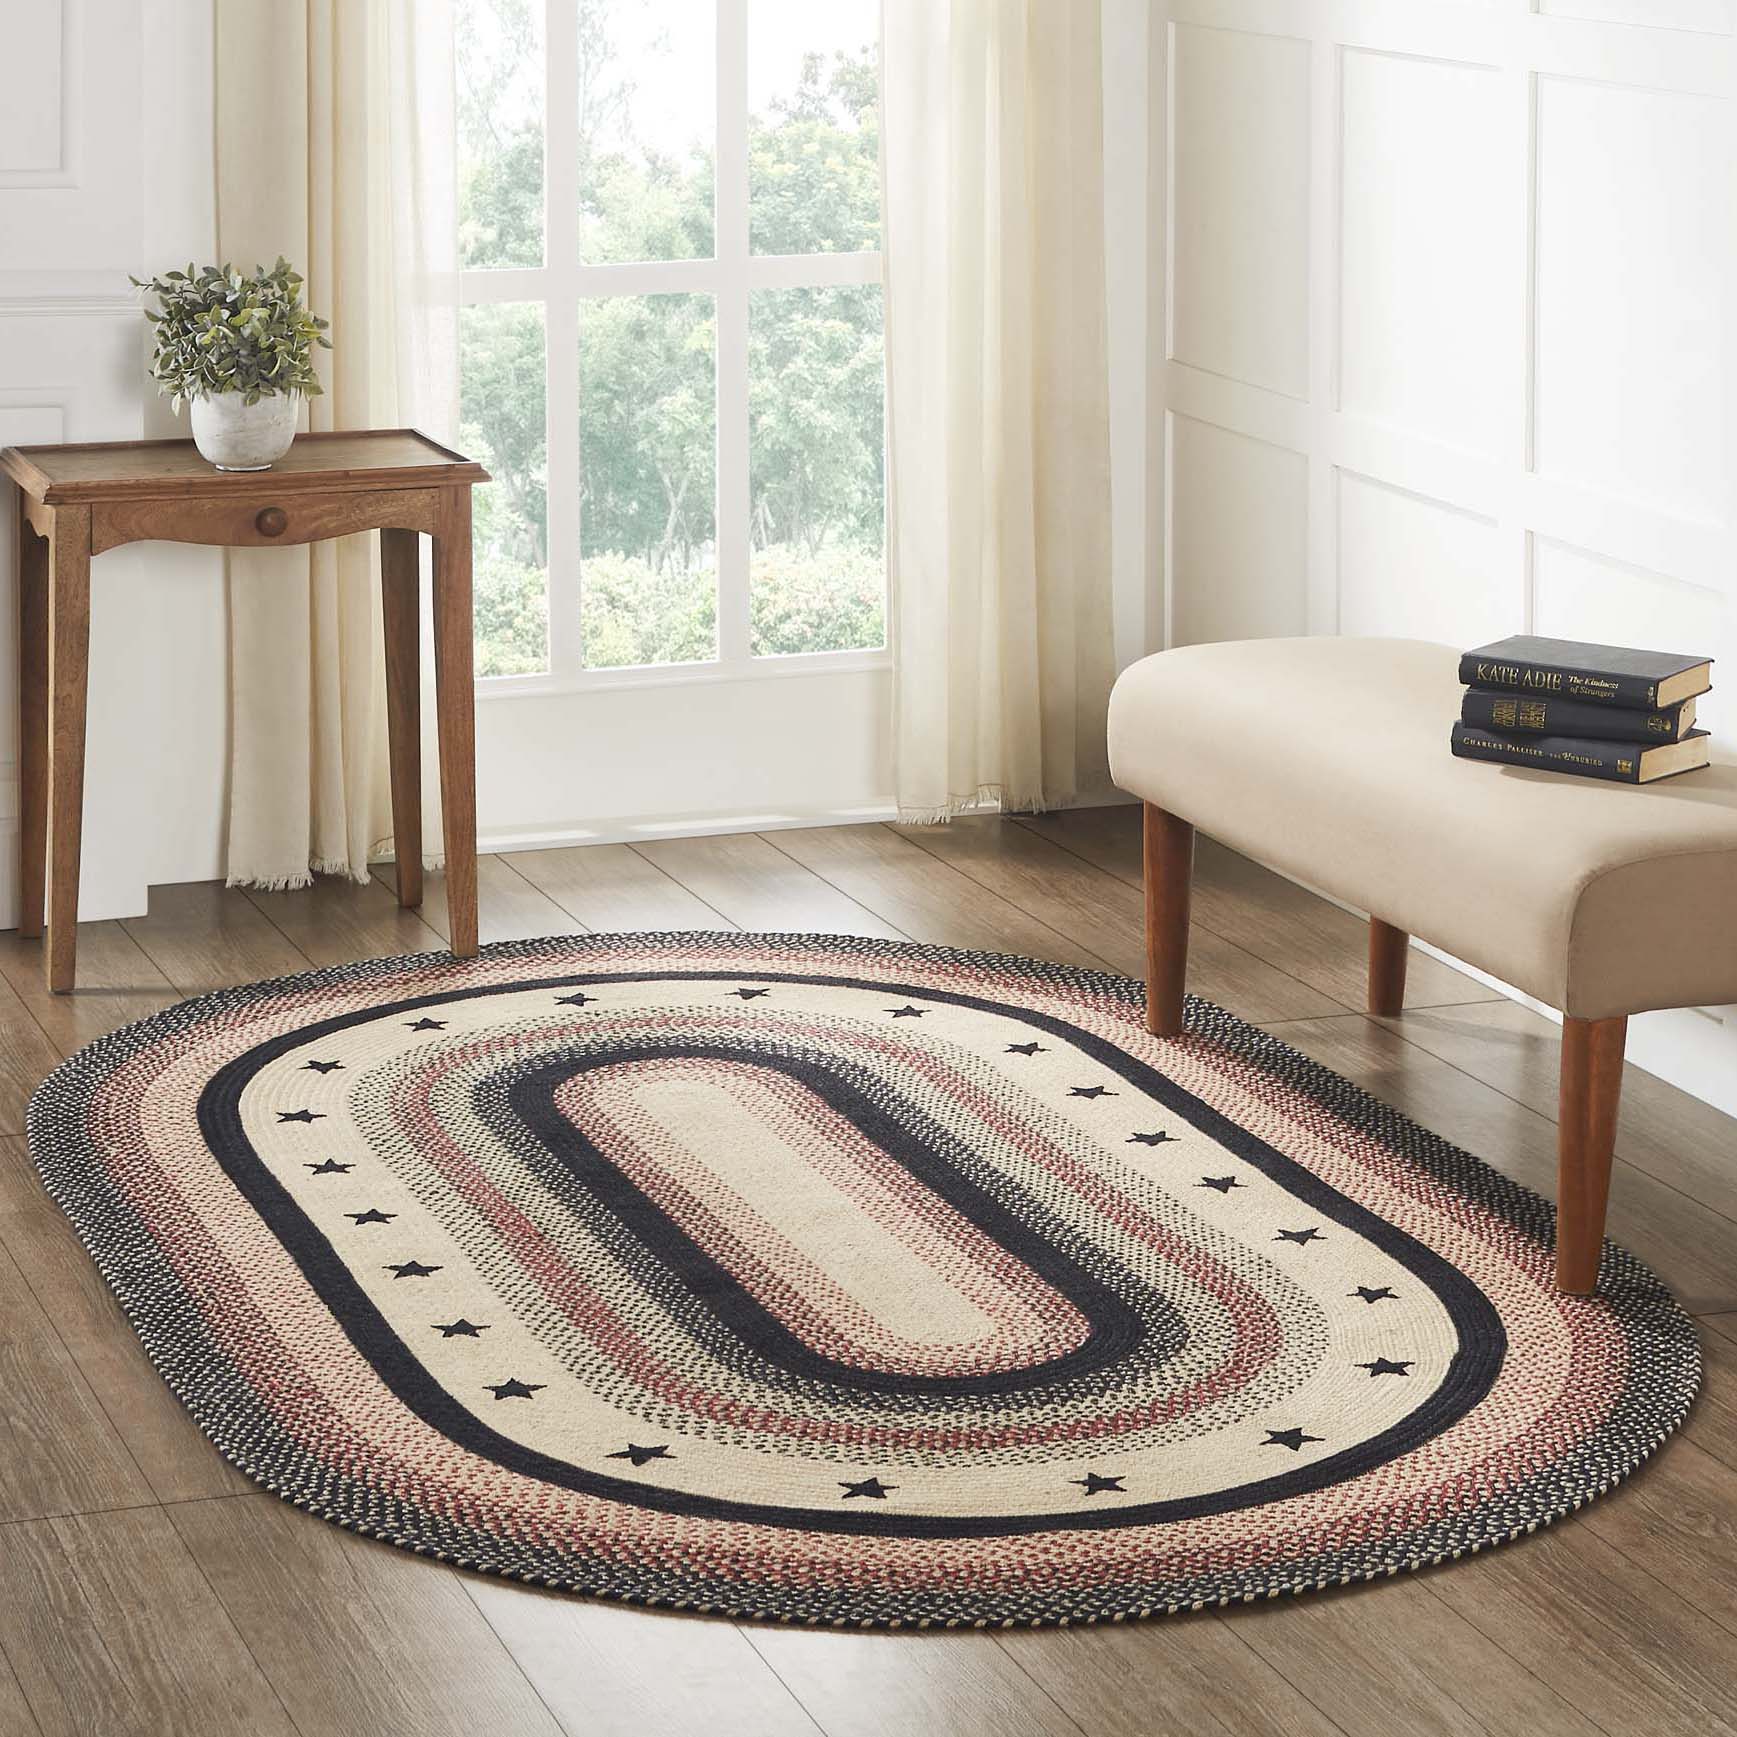 Colonial Star Jute Braided Rug Oval with Rug Pad 5'x8' VHC Brands